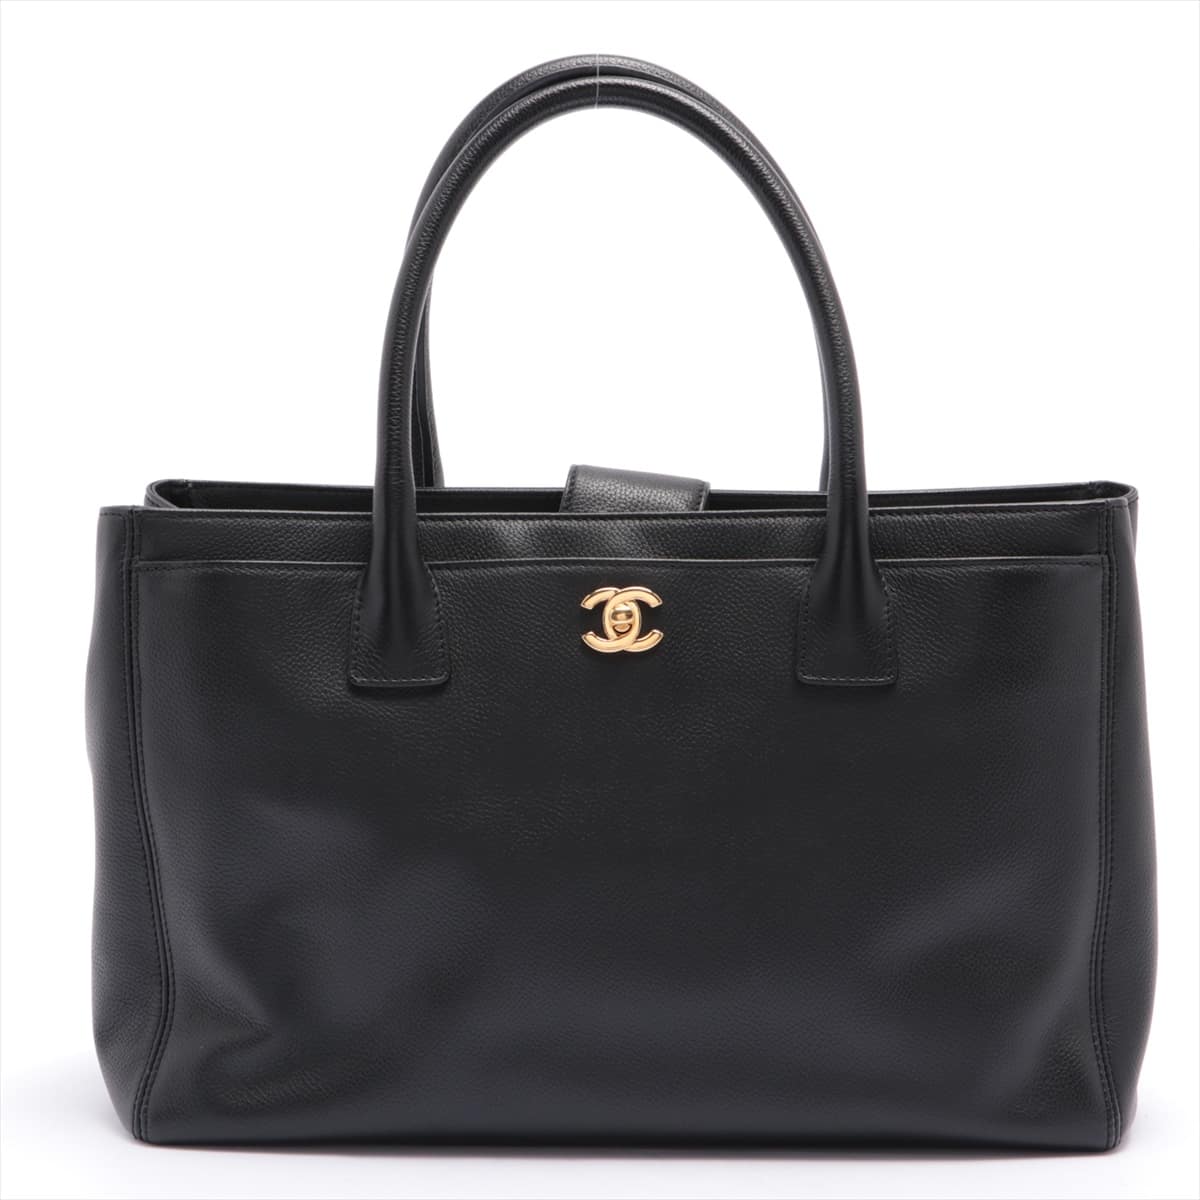 Chanel Executive Leather Tote bag Black Gold Metal fittings 16XXXXXX Comes with divider pouch Handle stinky